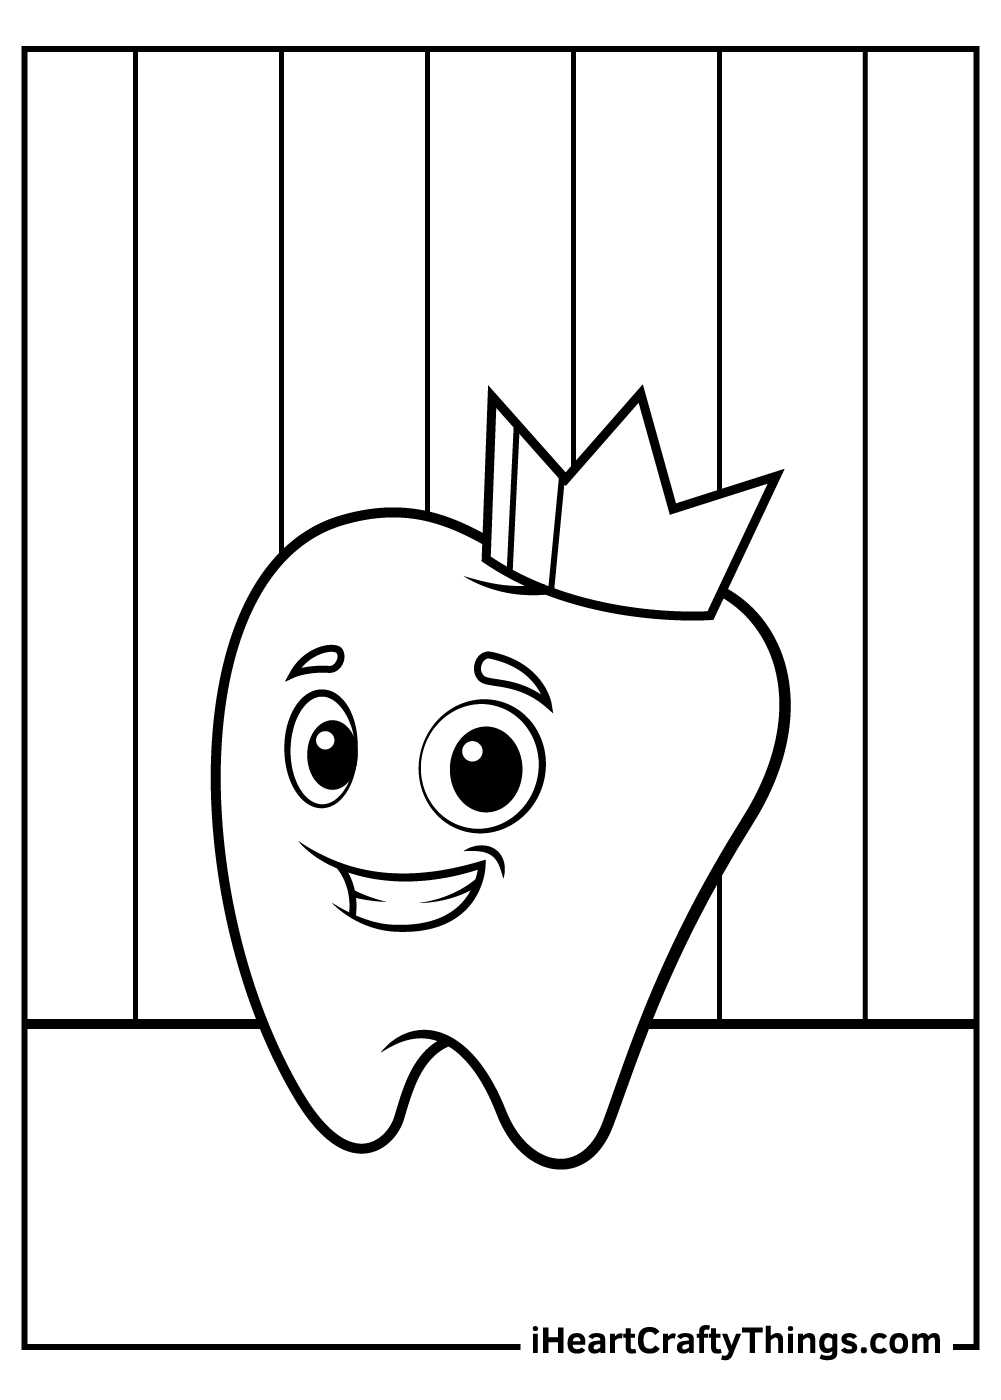 Tooth Coloring Pages (Updated 2021)